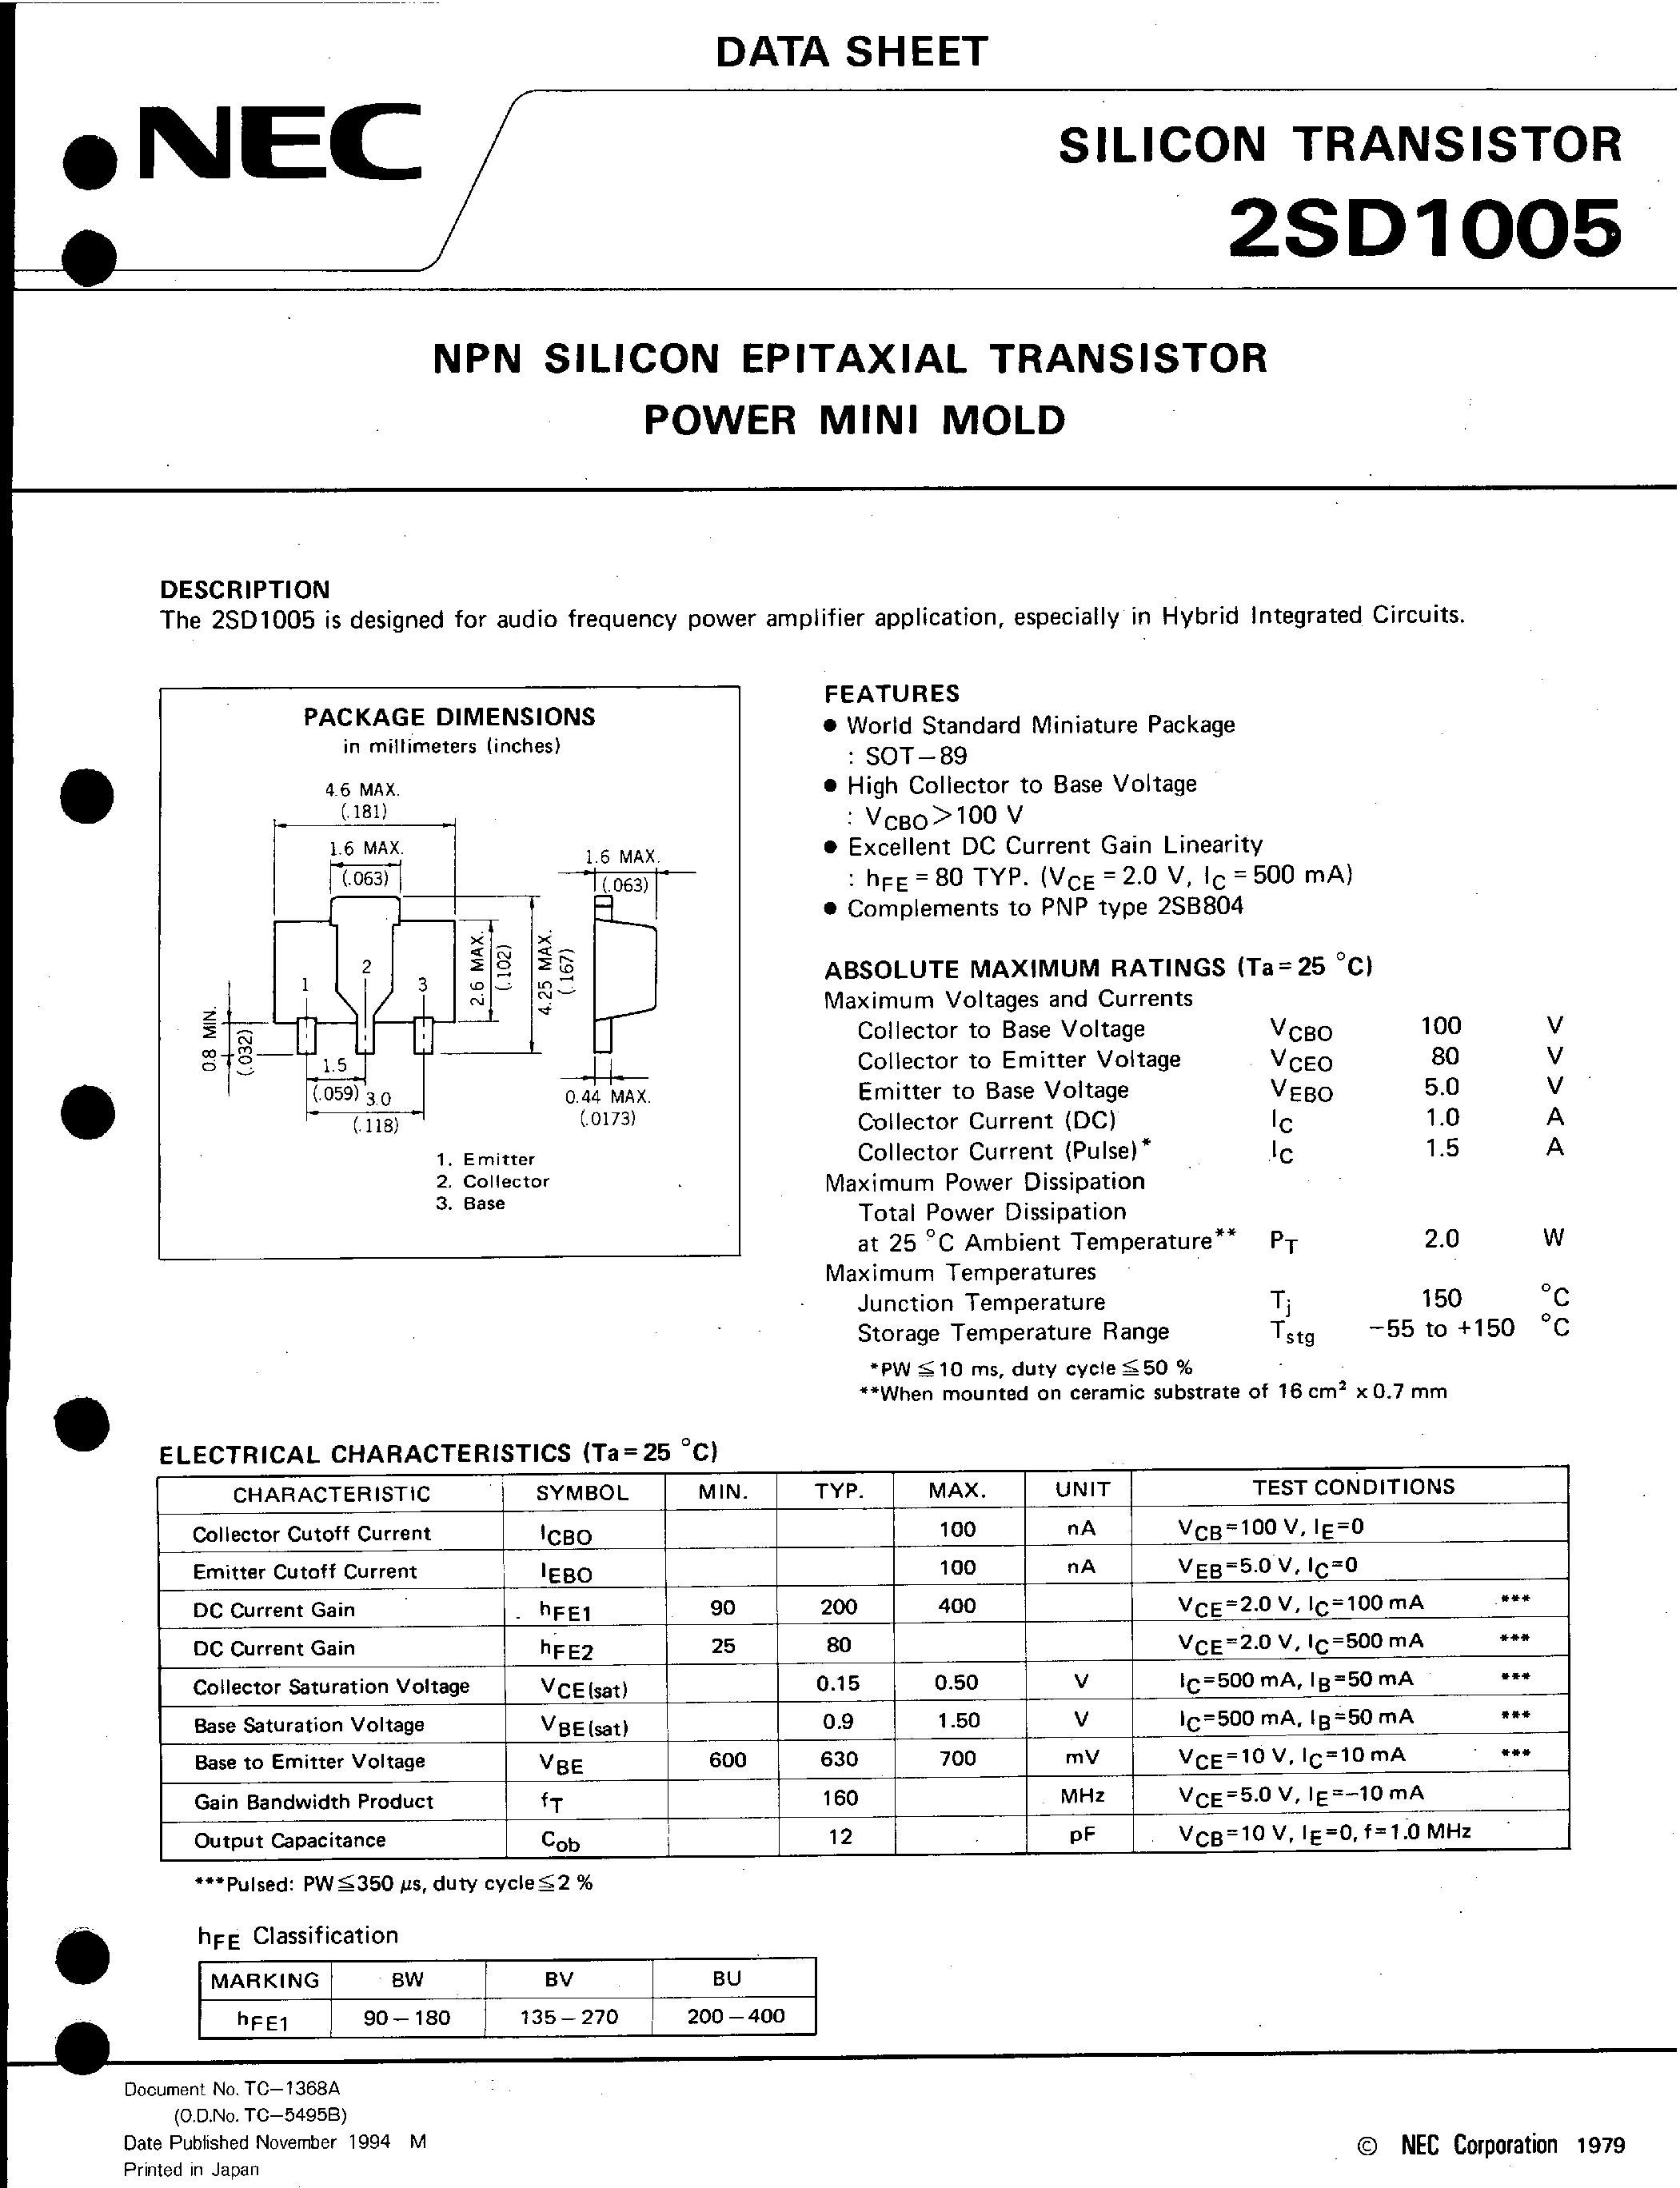 Даташит 2SD1005 - NPN SILICON EPITAXIAL TRANSISTOR POWER MINI MOLD страница 1